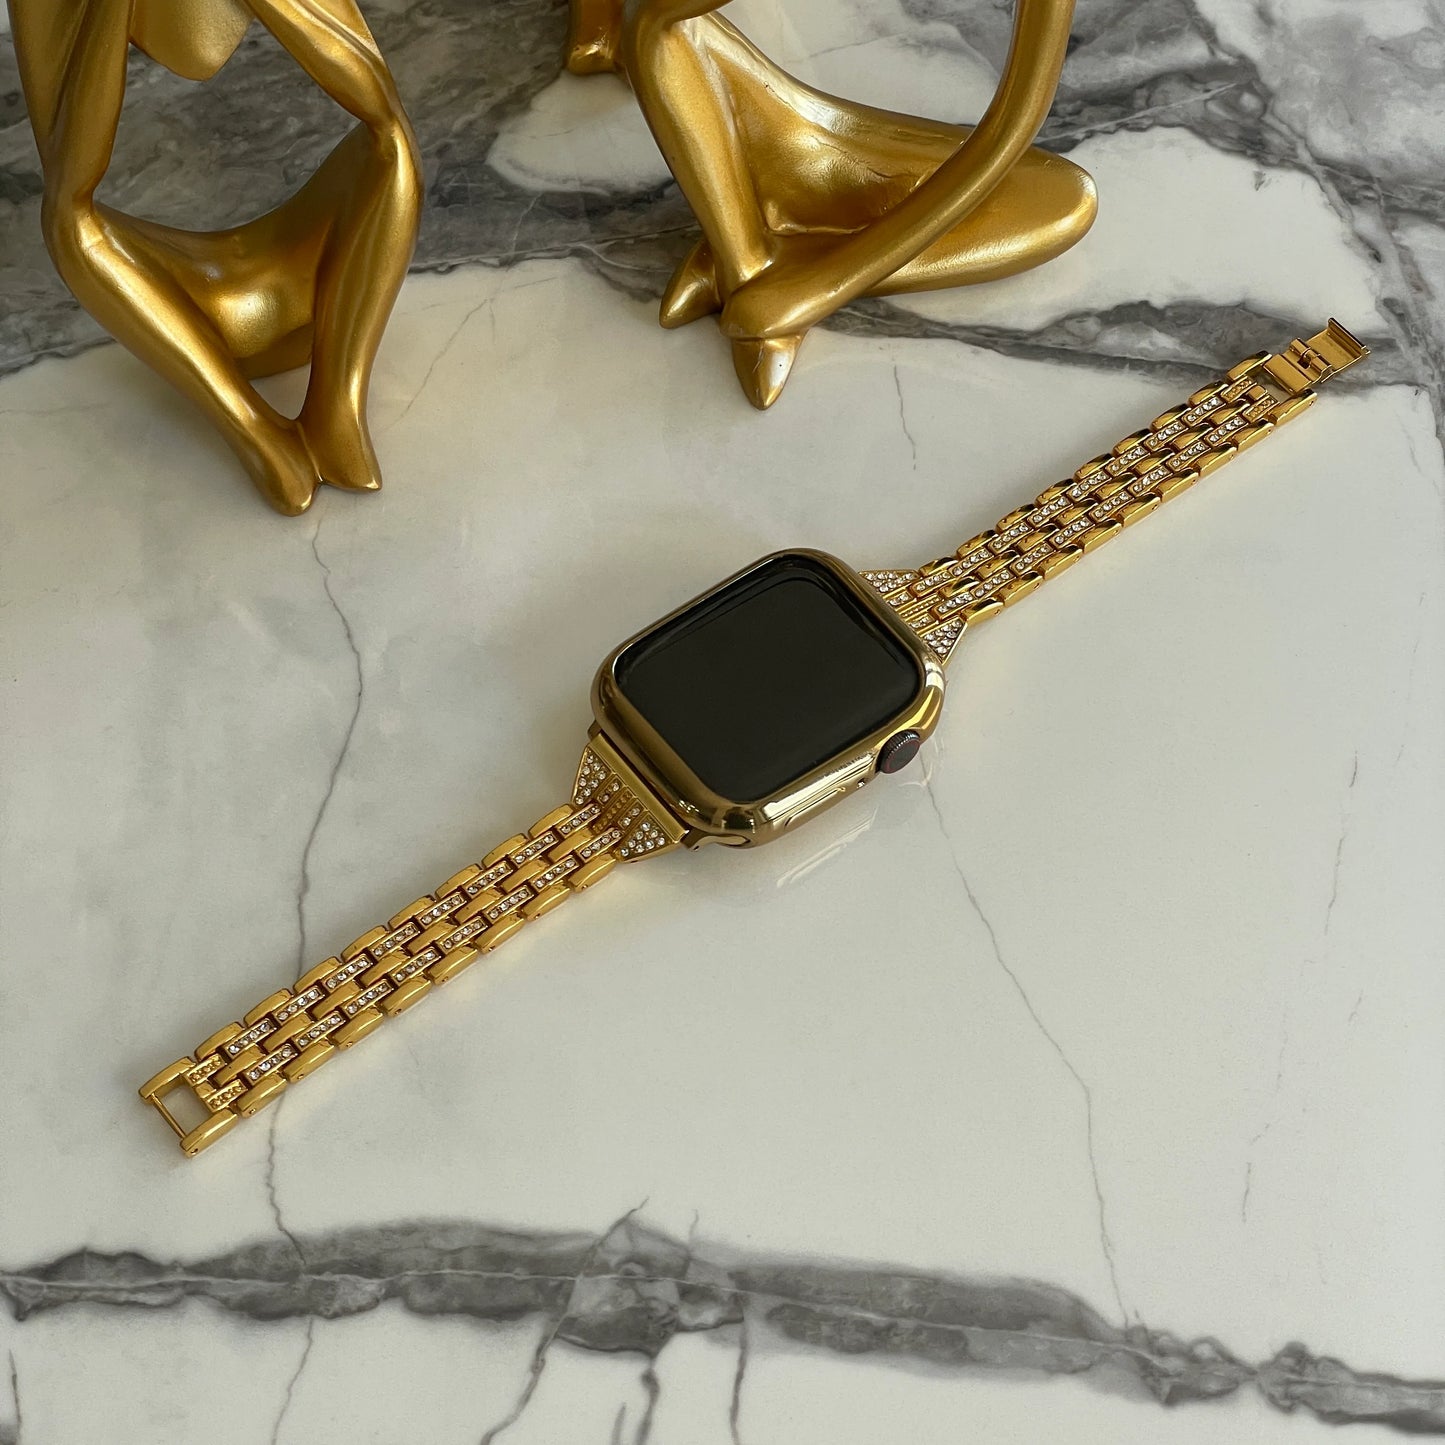 JACKIE Diamante Apple Watch Case & Band